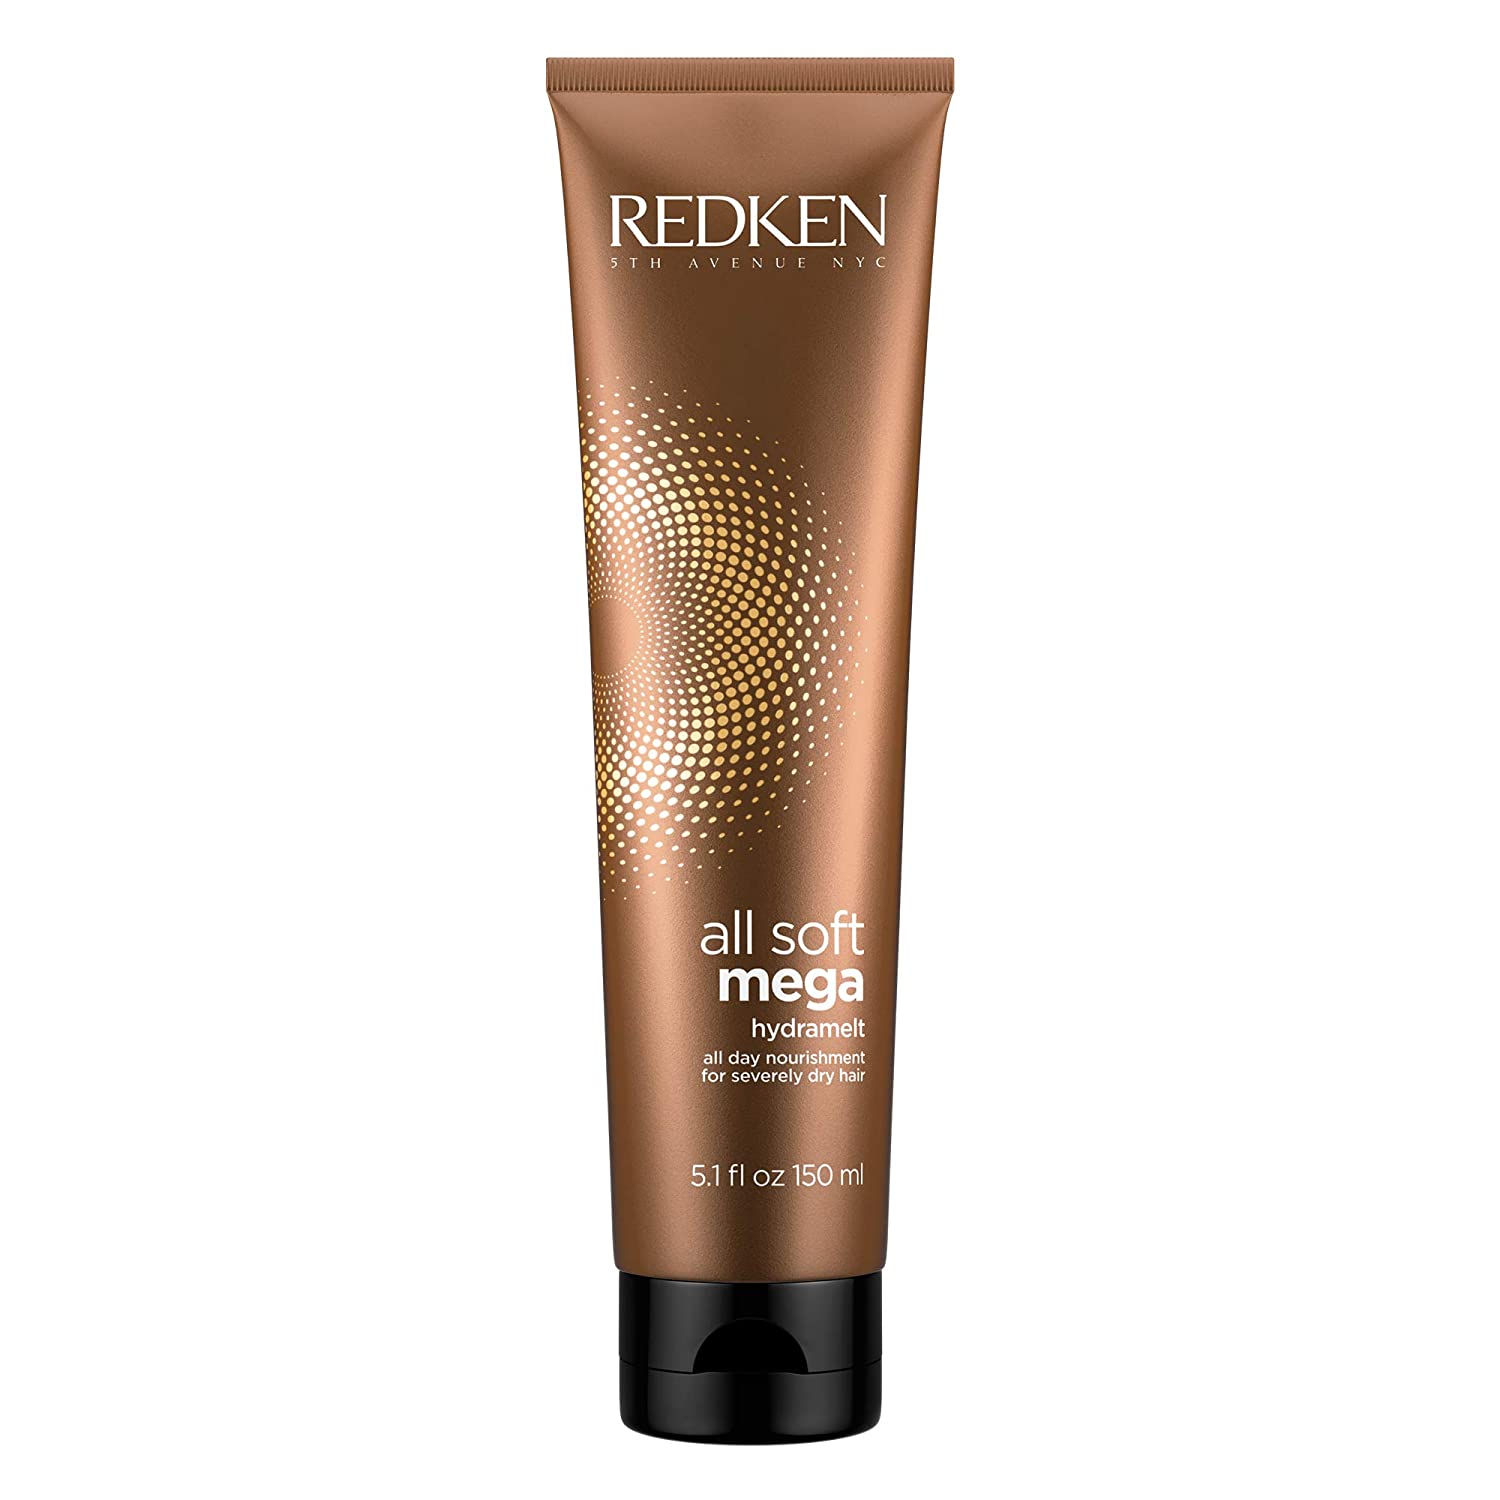 Redken All Soft Mega Hydramelt Leave-In Treatment, Deep Conditioning Hair Treatment for Extremely Dry, Coarse Hair, 5.0999999999999996 fl. oz. - image 1 of 4